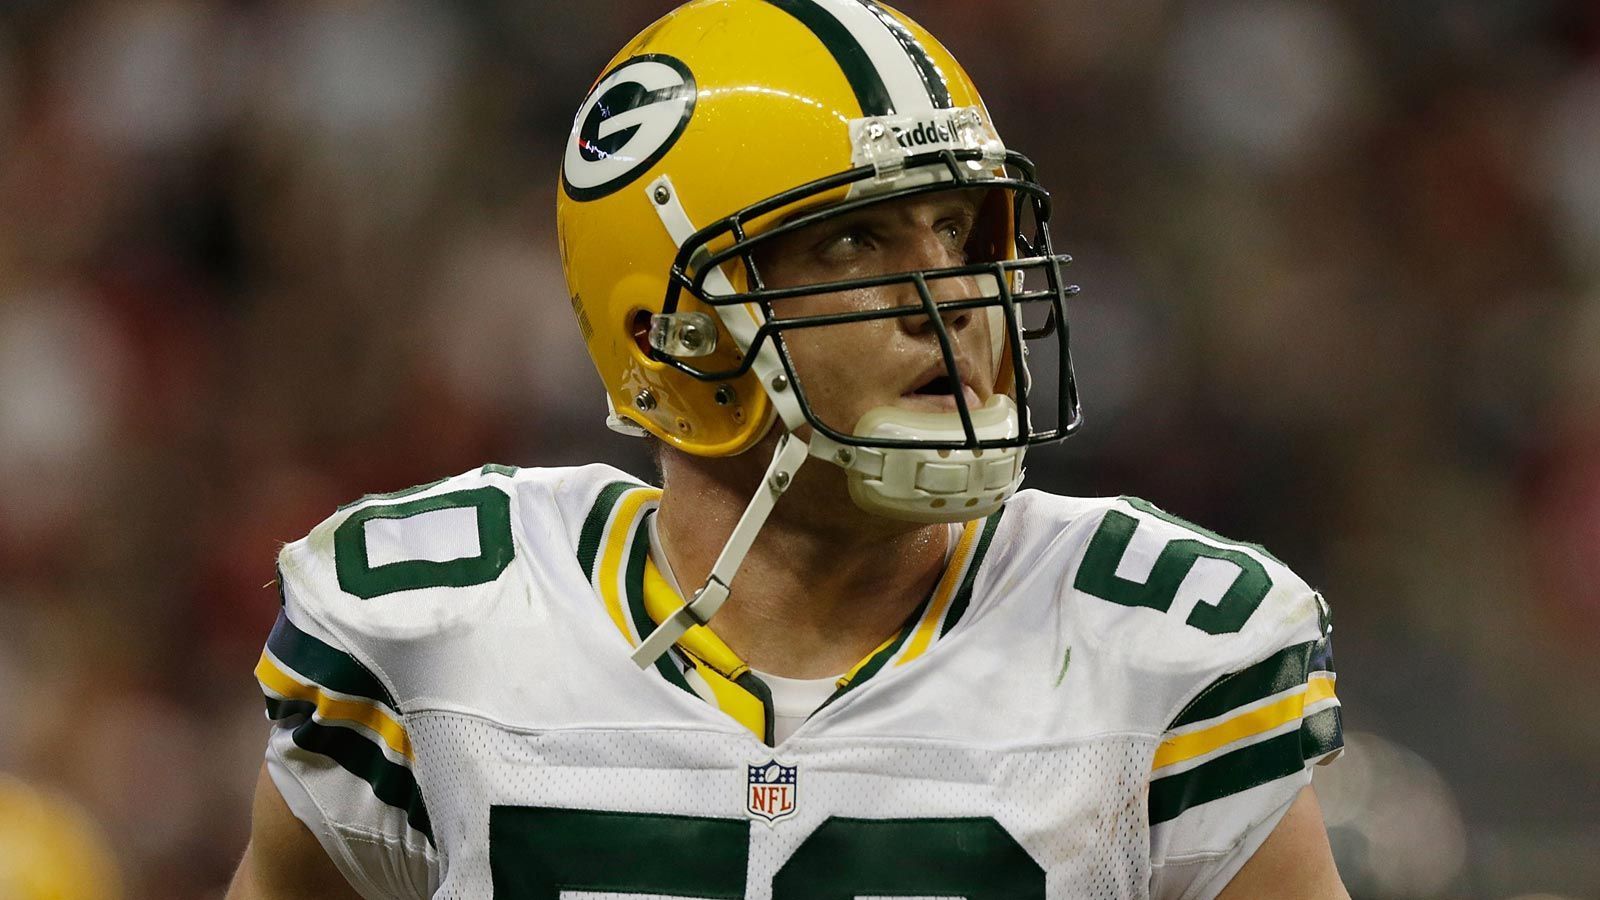 
                <strong>A.J. Hawk (Green Bay Packers)</strong><br>
                Draftposition: Runde 1/Pick 5 (2006) -Spiele: 158 -Wichtigste Statistiken: 20 Sacks, neun Interceptions, 644 Tackles -Auszeichnungen/Erfolge: Super Bowl Champion (XLV), Green Bay Packers All-Time Leader in Tackles - Weitere Teams: Cincinnati Bengals (2015), Atlanta Falcons (2016) 
              